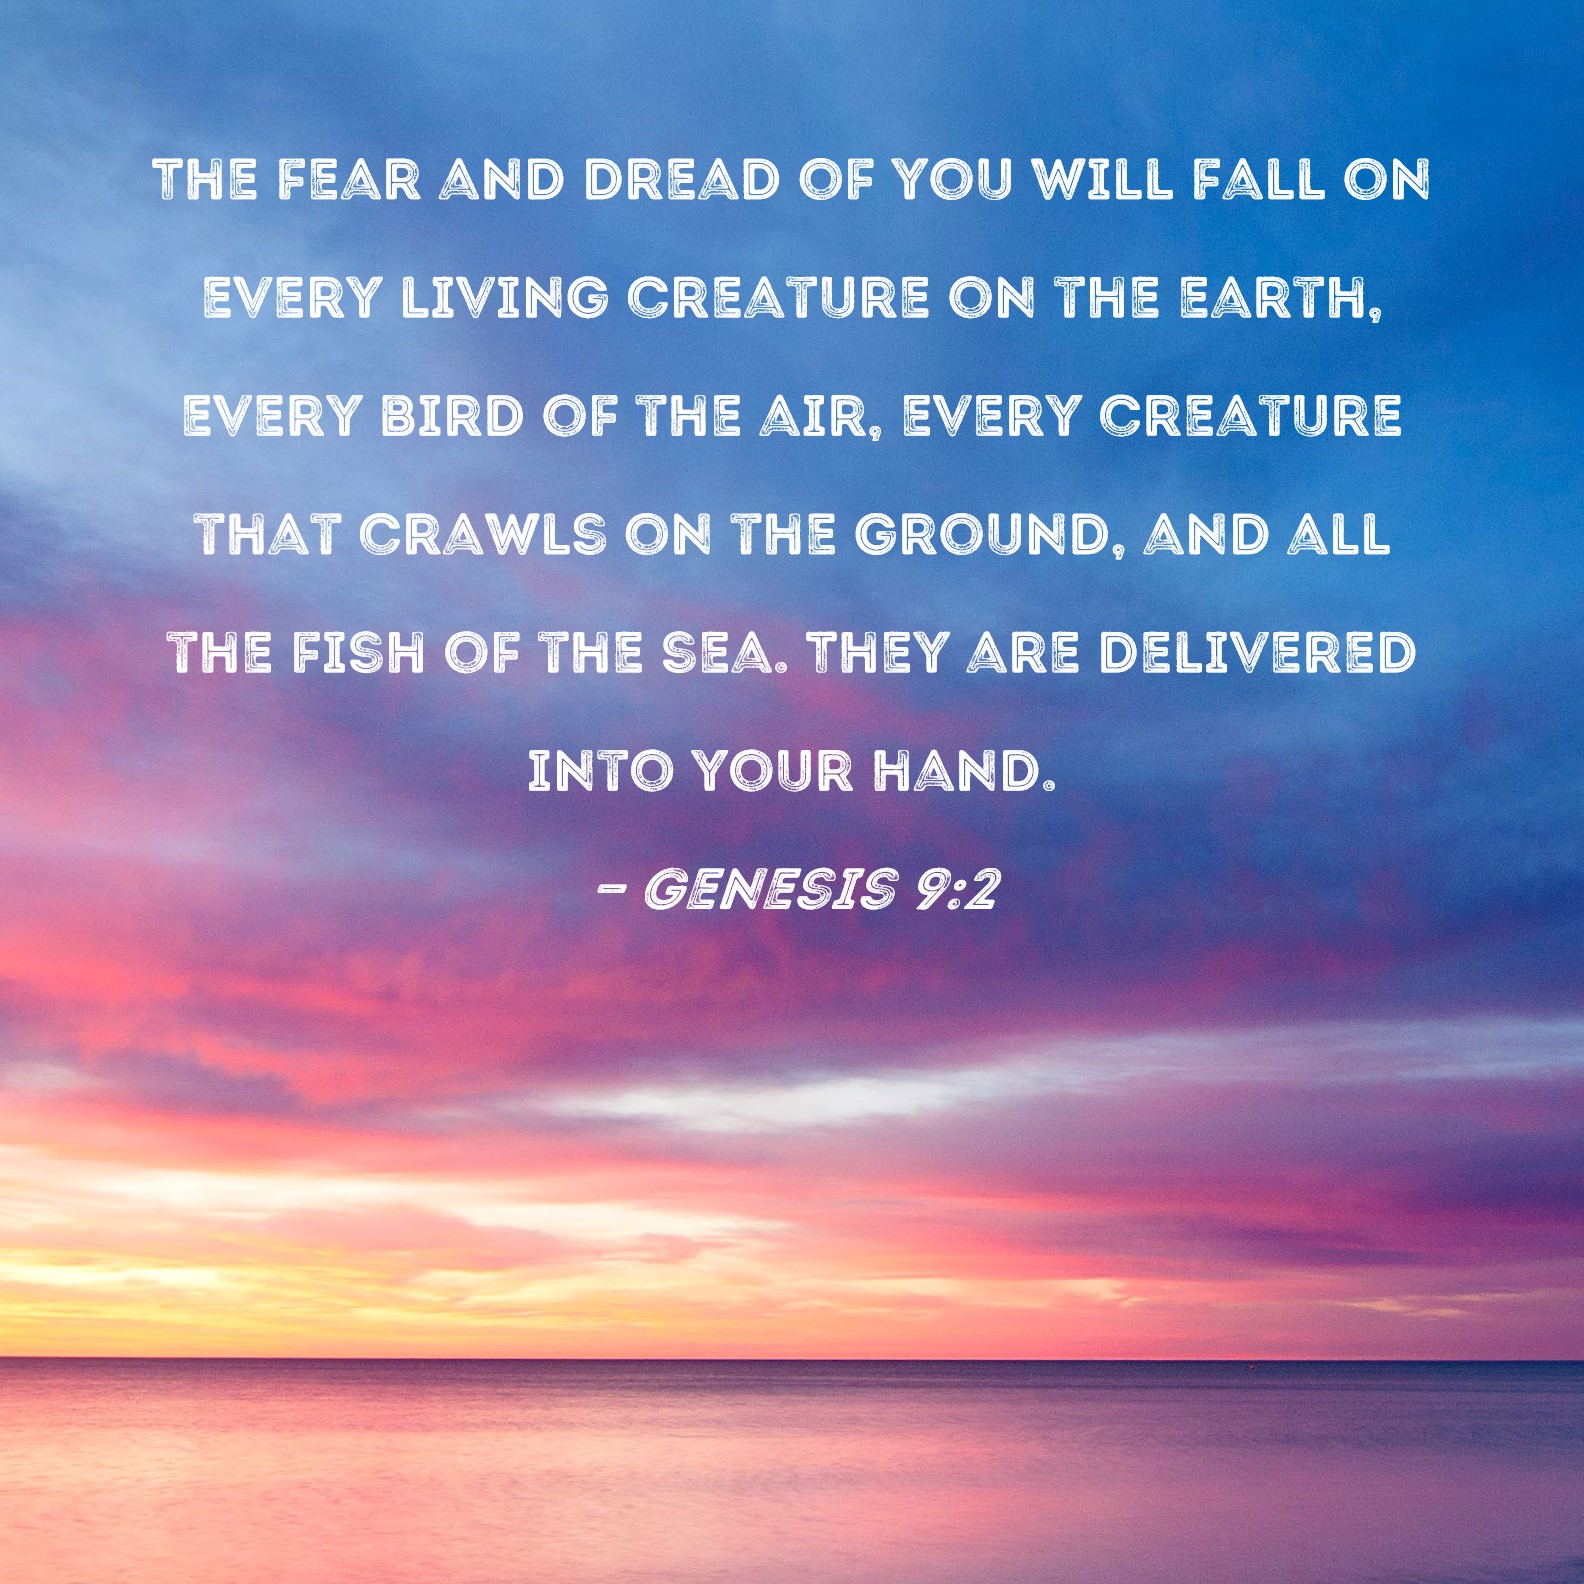 Genesis 9:2 The fear and dread of you will fall on every living creature on  the earth, every bird of the air, every creature that crawls on the ground,  and all the